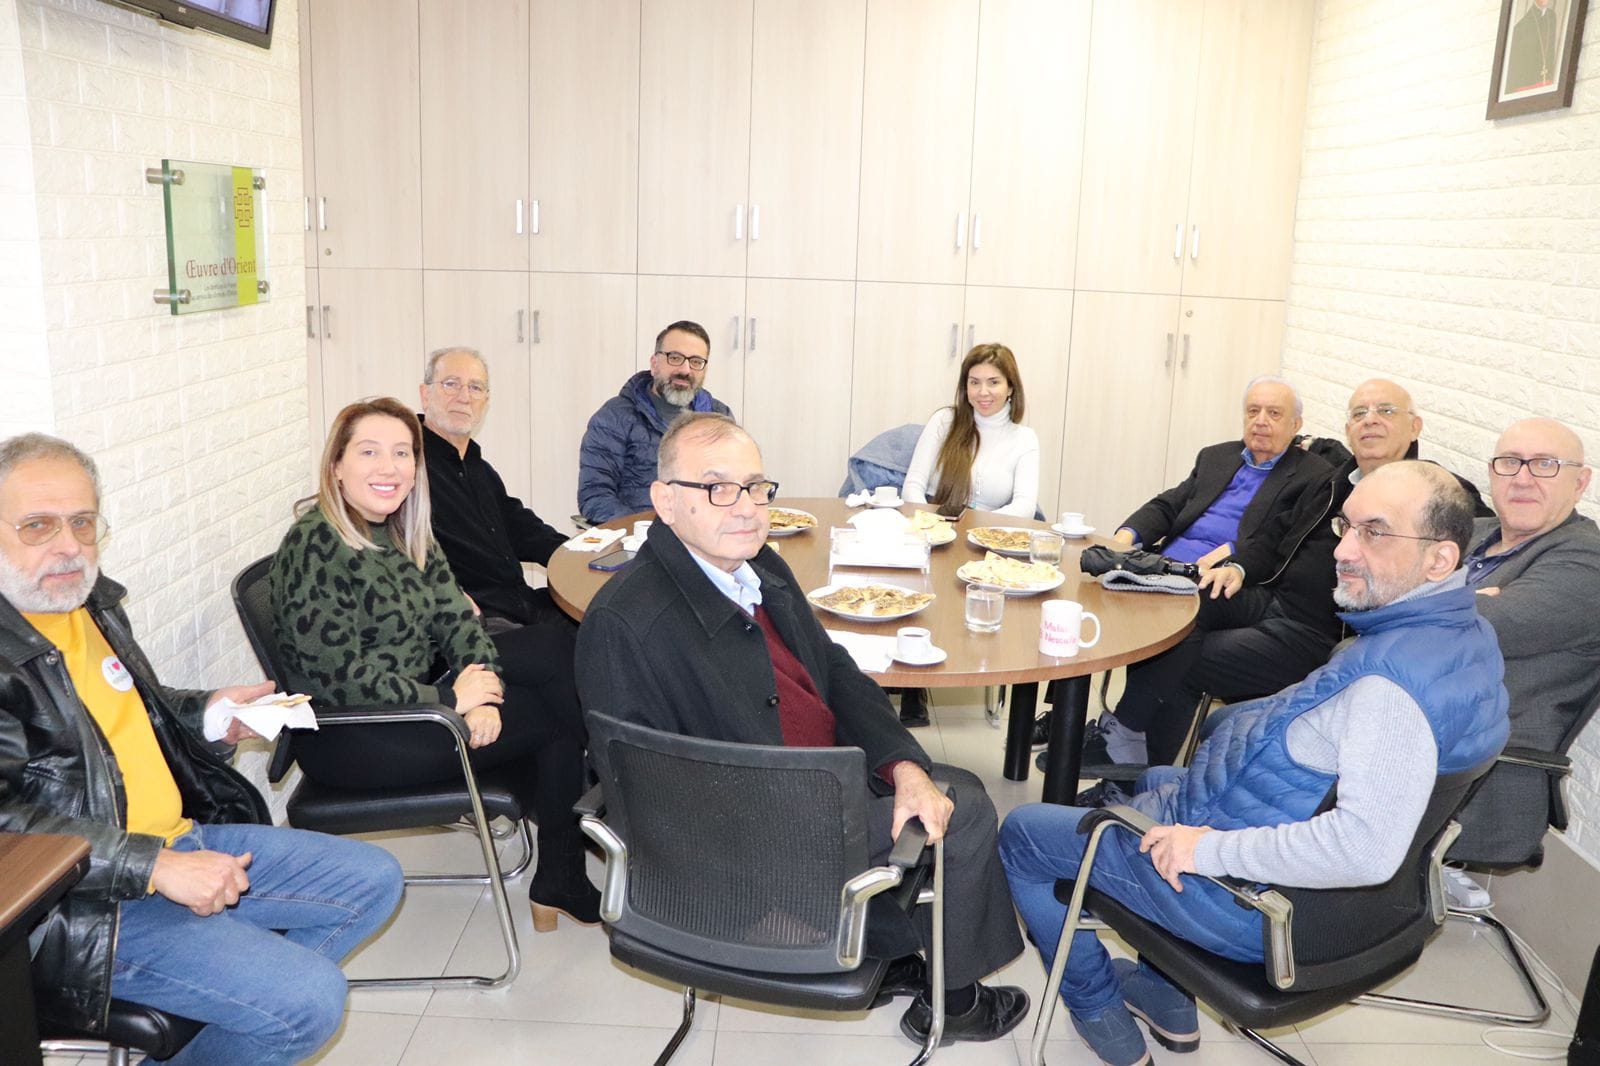 Visit Of the High Council Of the Chaldean Community in Lebanon